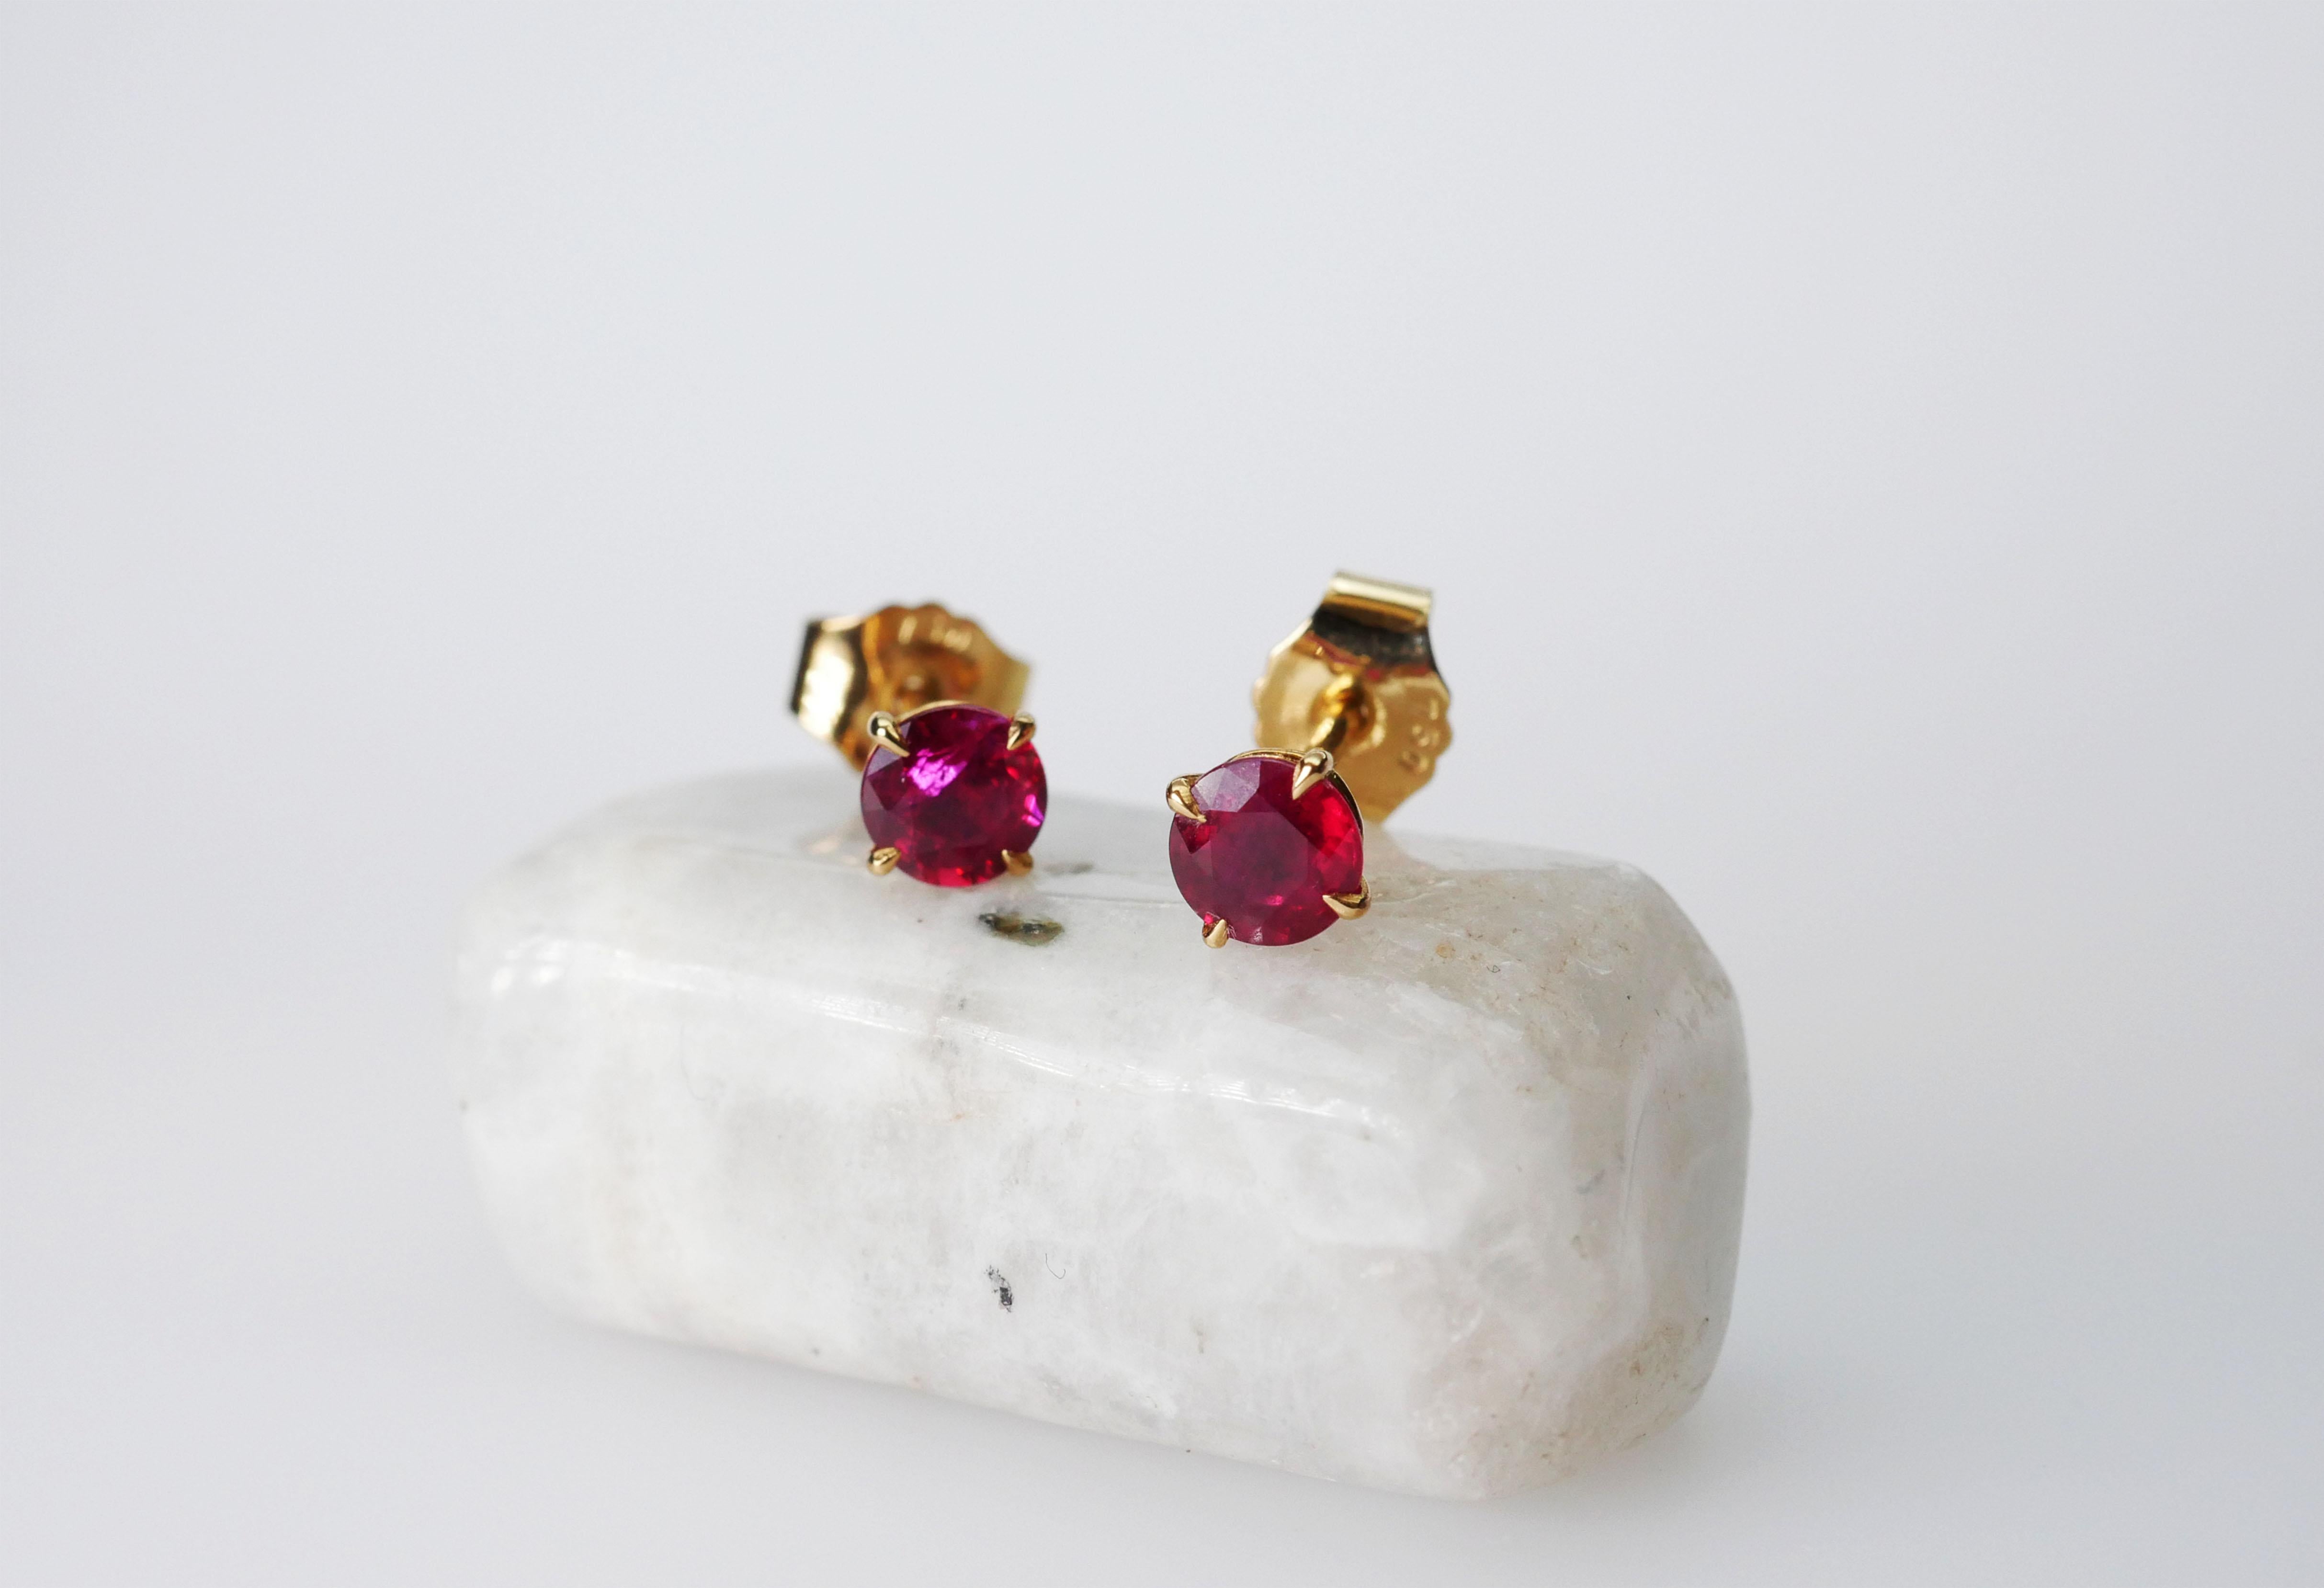 Handmade solitaire bright red round ruby stud earrings in 18k yellow gold. Simple and elegant with talon-shaped claws and an open basket setting, perfect to wear solo or stacked.

Total Ruby Weight 2/1.20 Carats